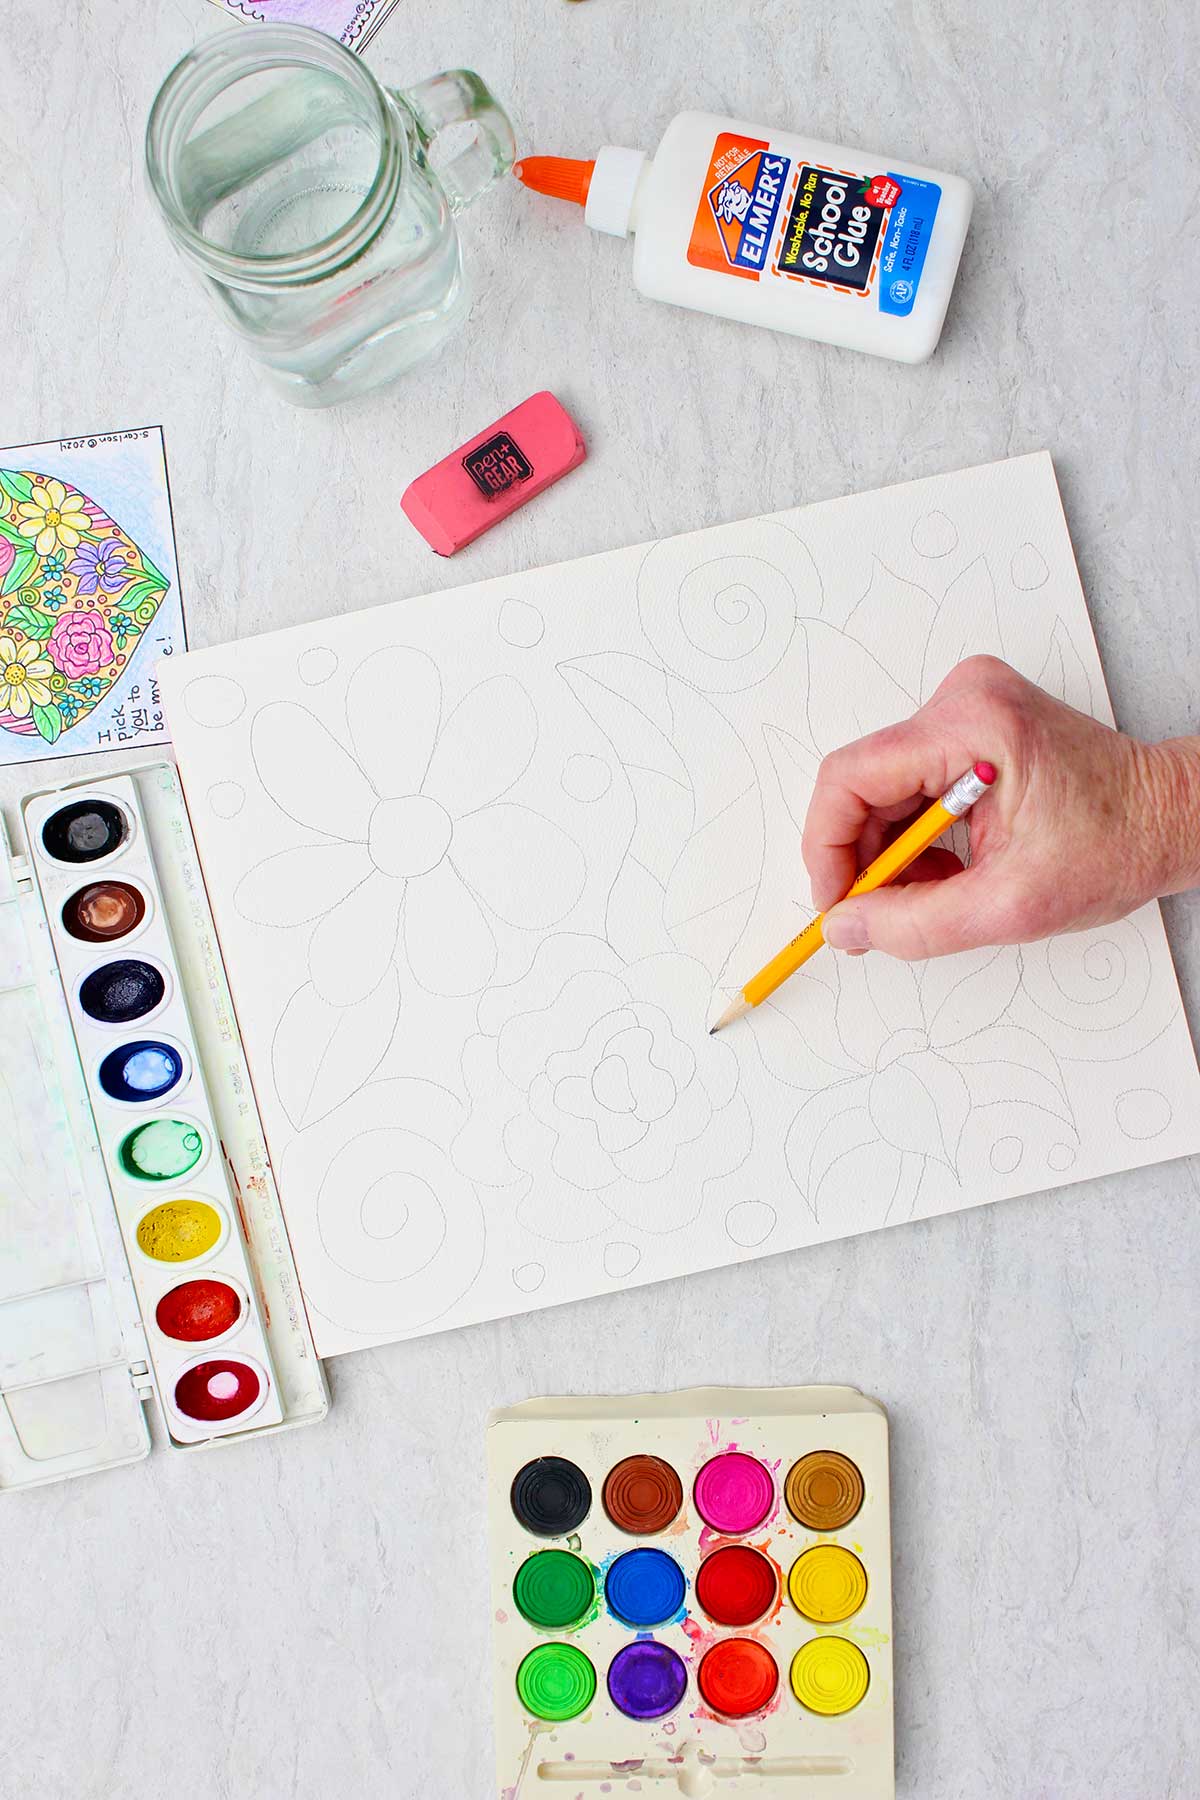 Hand sketching flowers on canvas with a pencil with supplies near by.